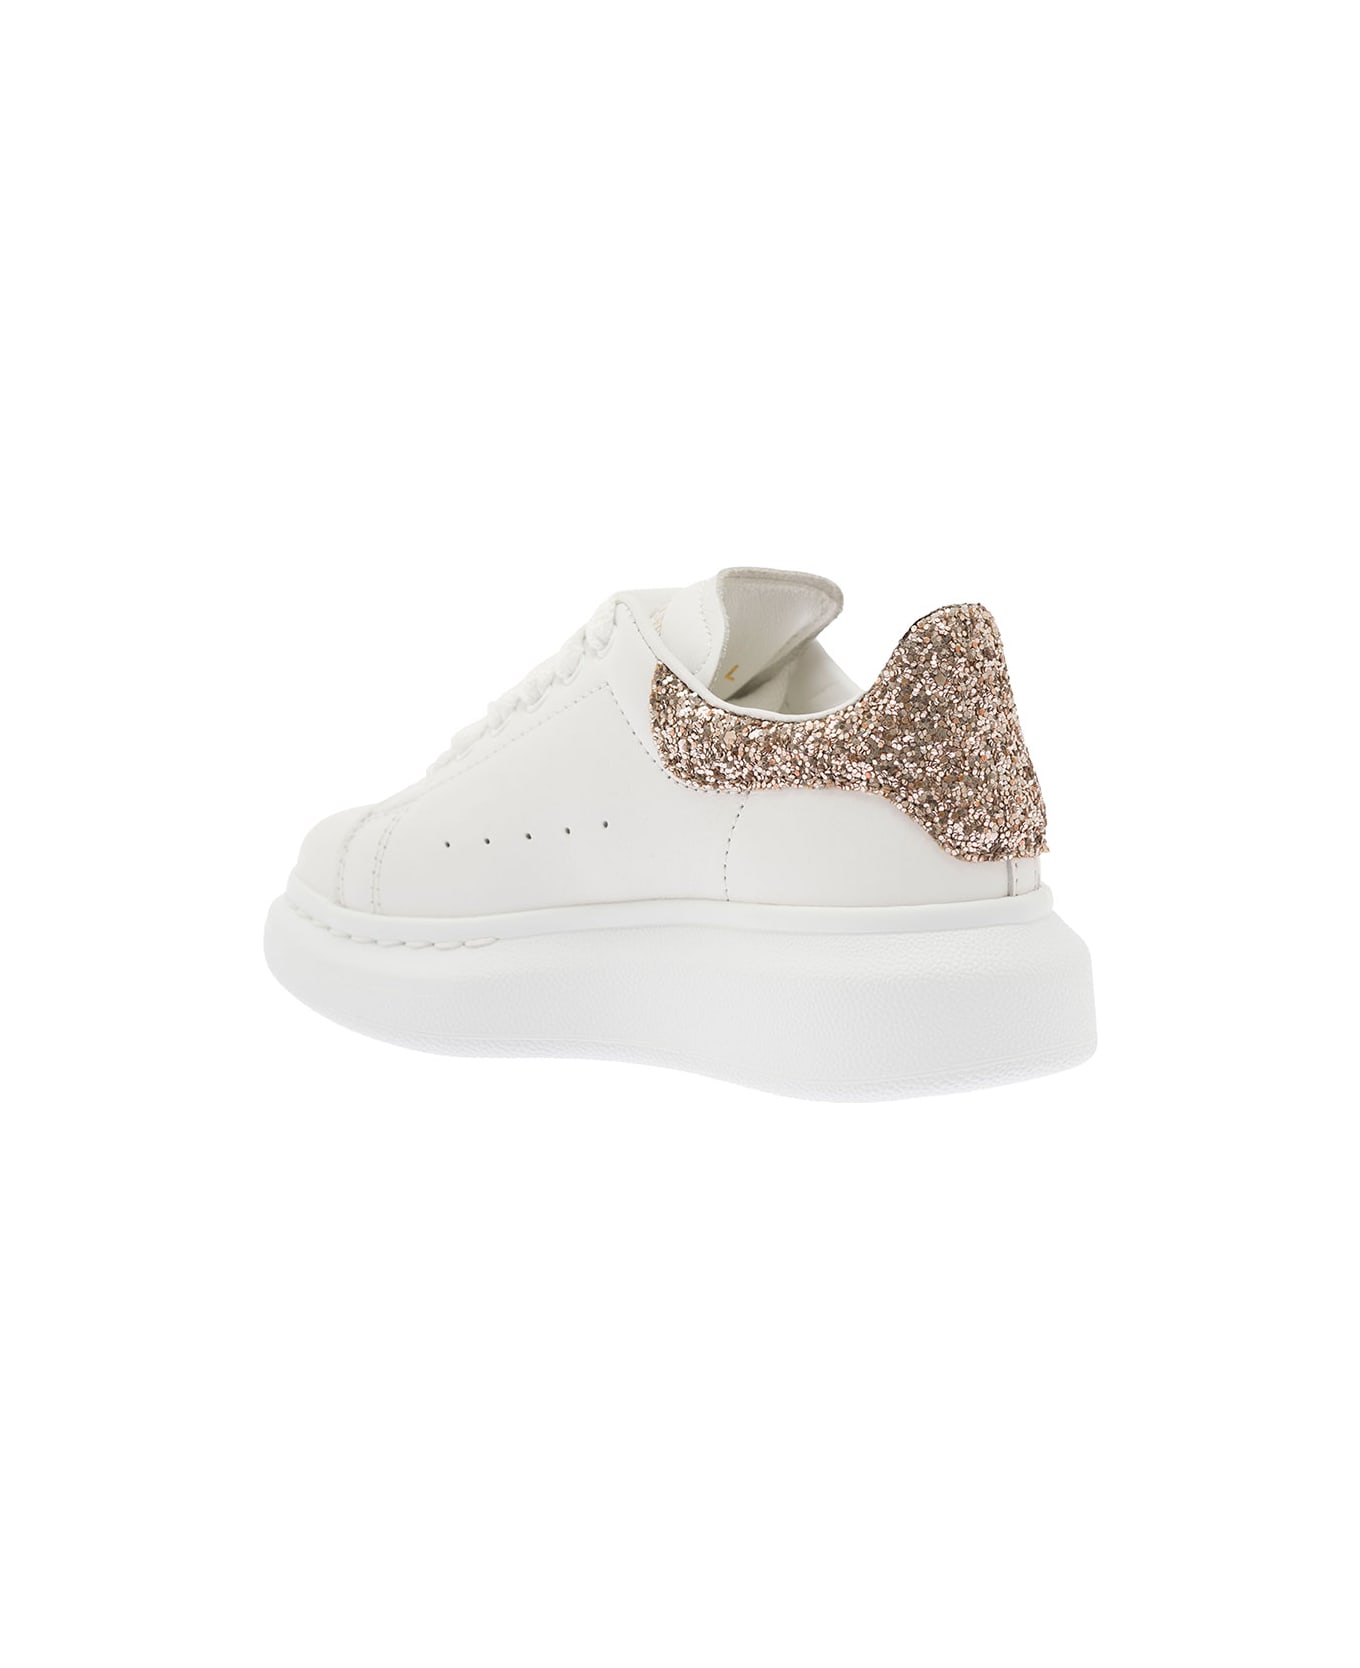 Alexander McQueen White Sneaker With Contrasted Heel With Glitter Detailing In Calf Leather - Black